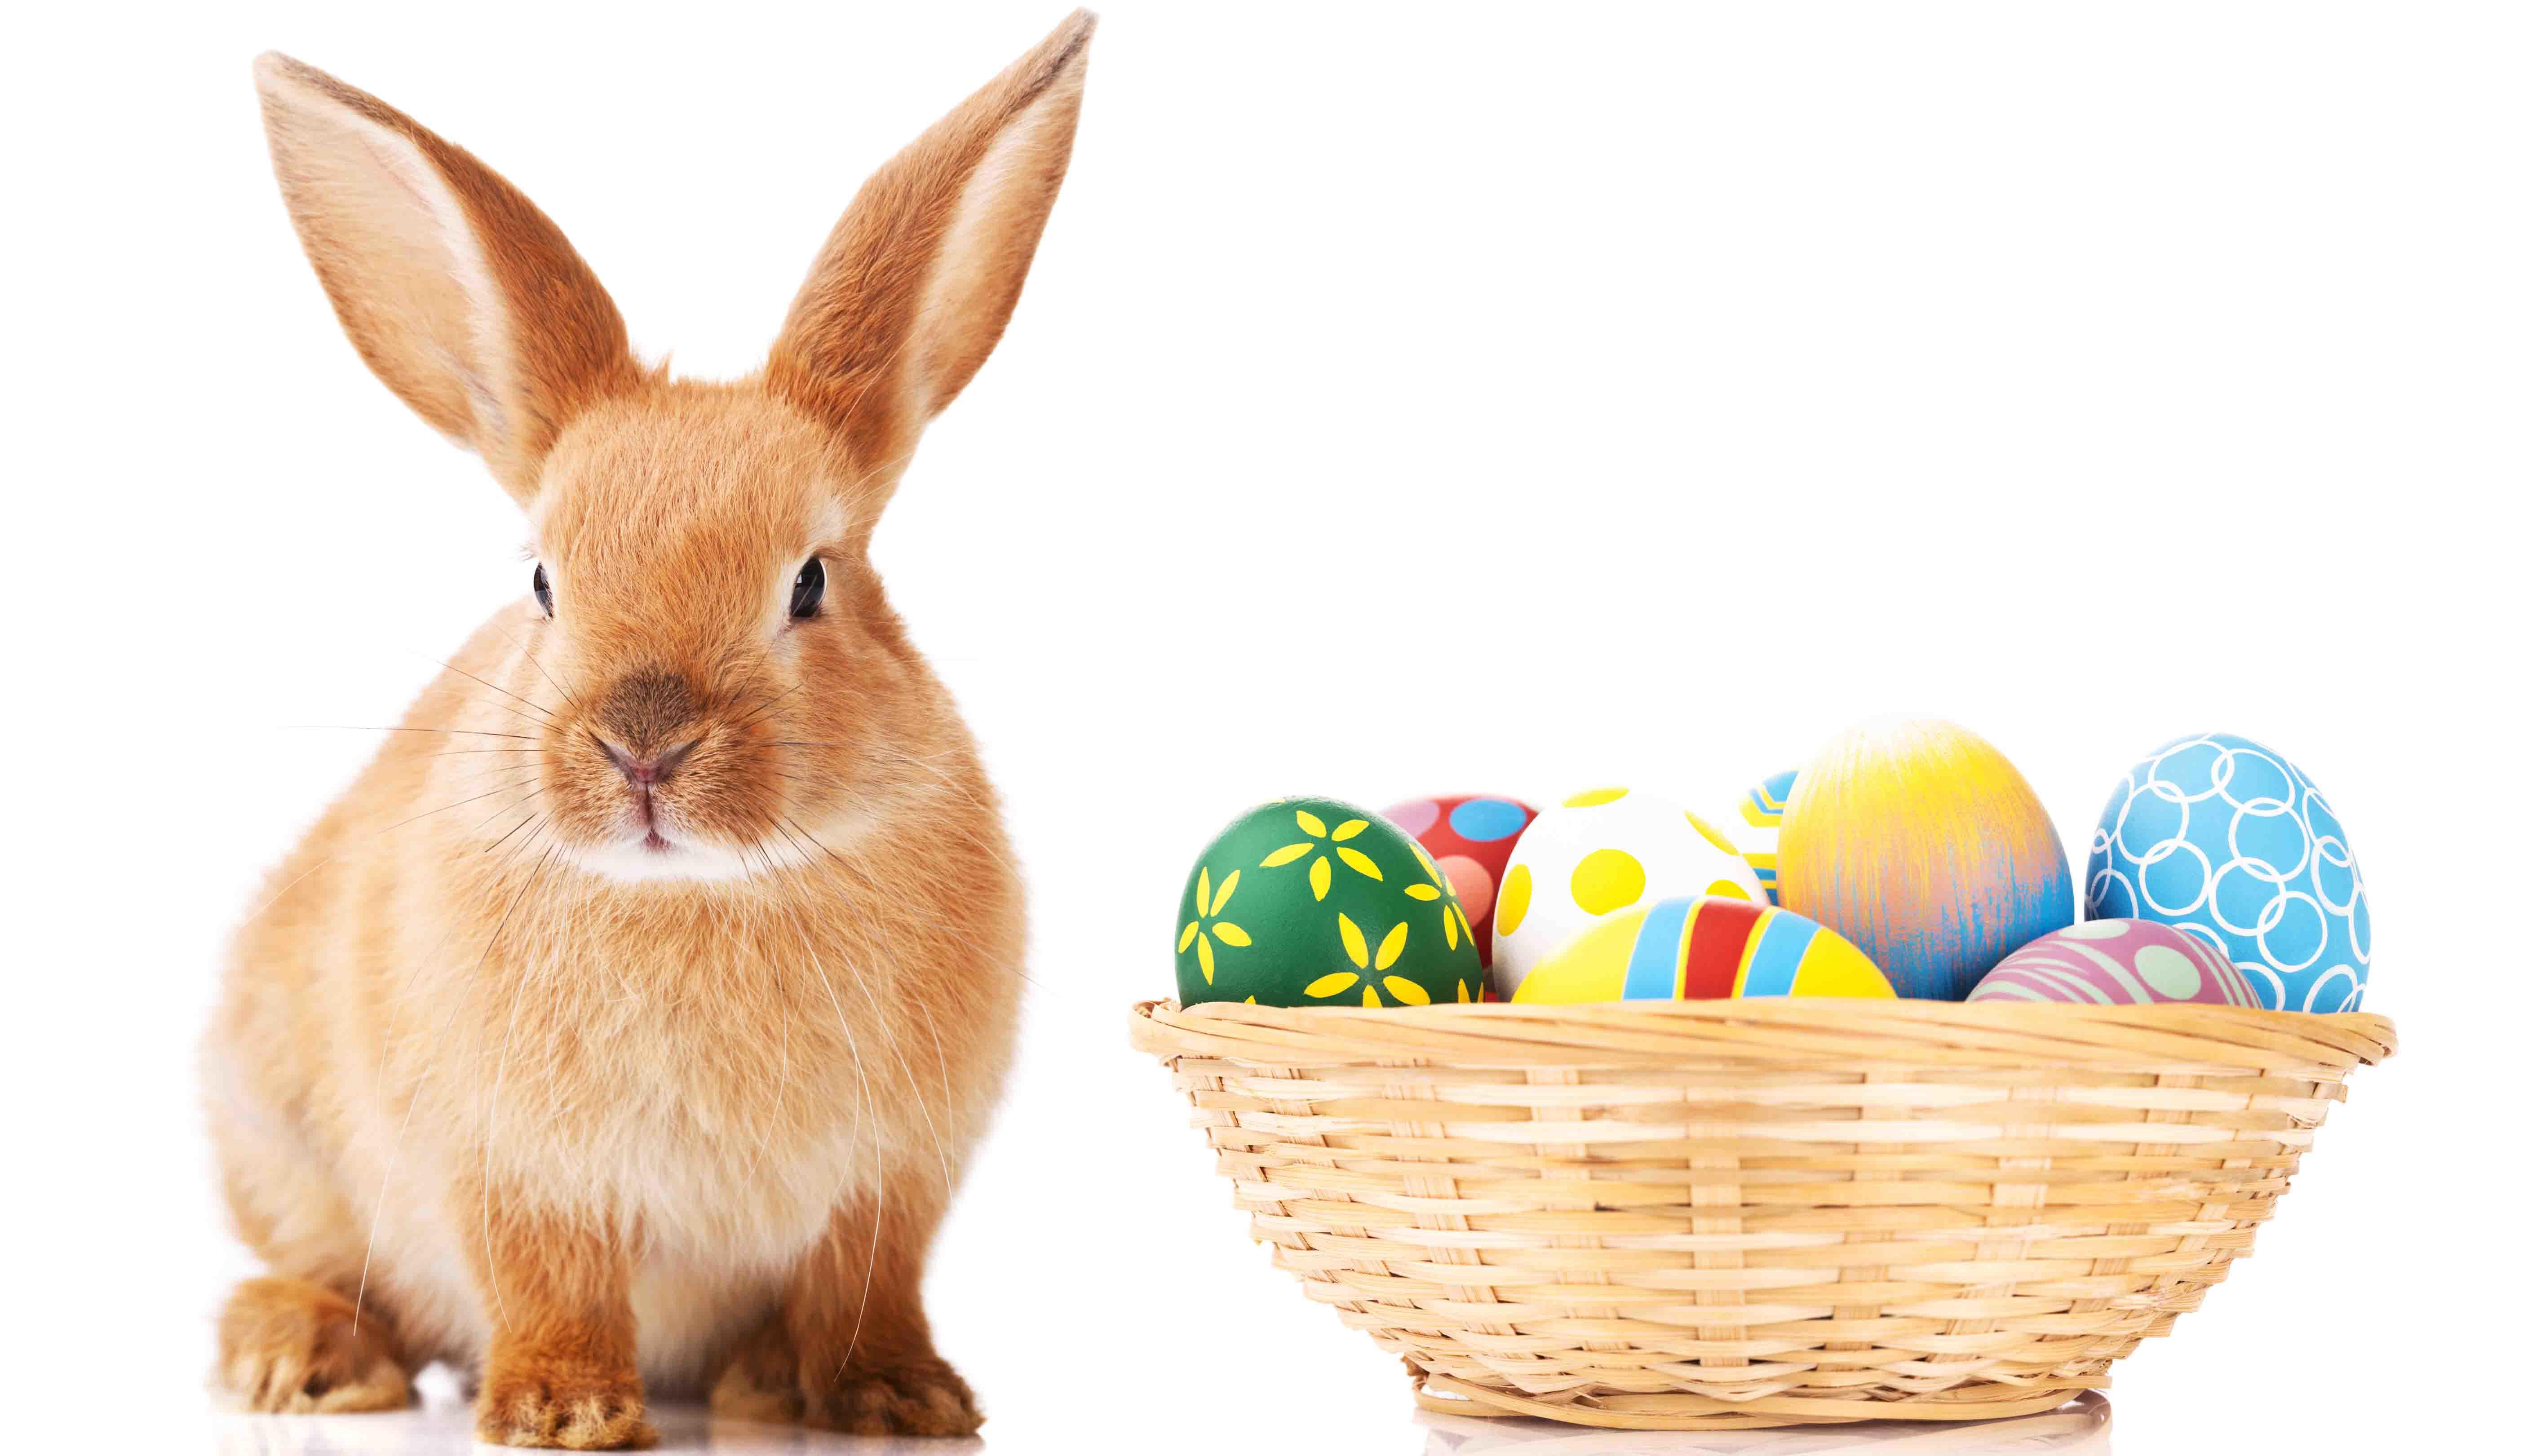 Origins of the Easter Bunny and Easter Eggs